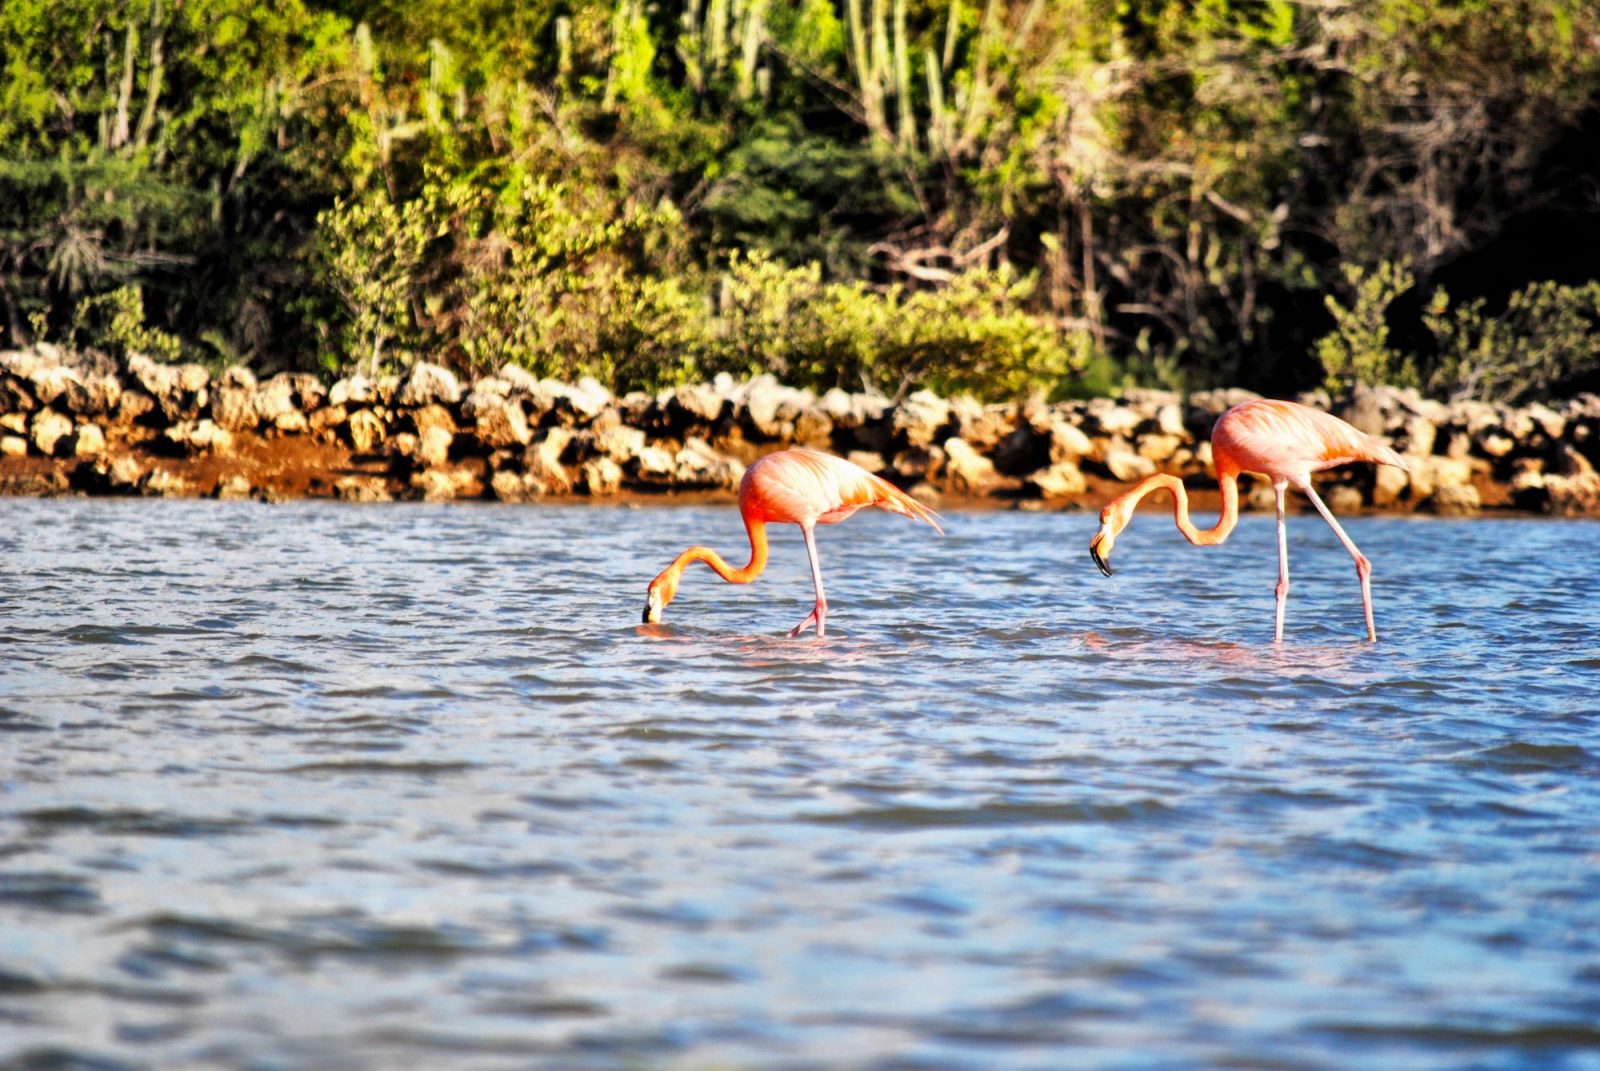 Wild Flamingos And Other Reasons To Visit Curacao Married With